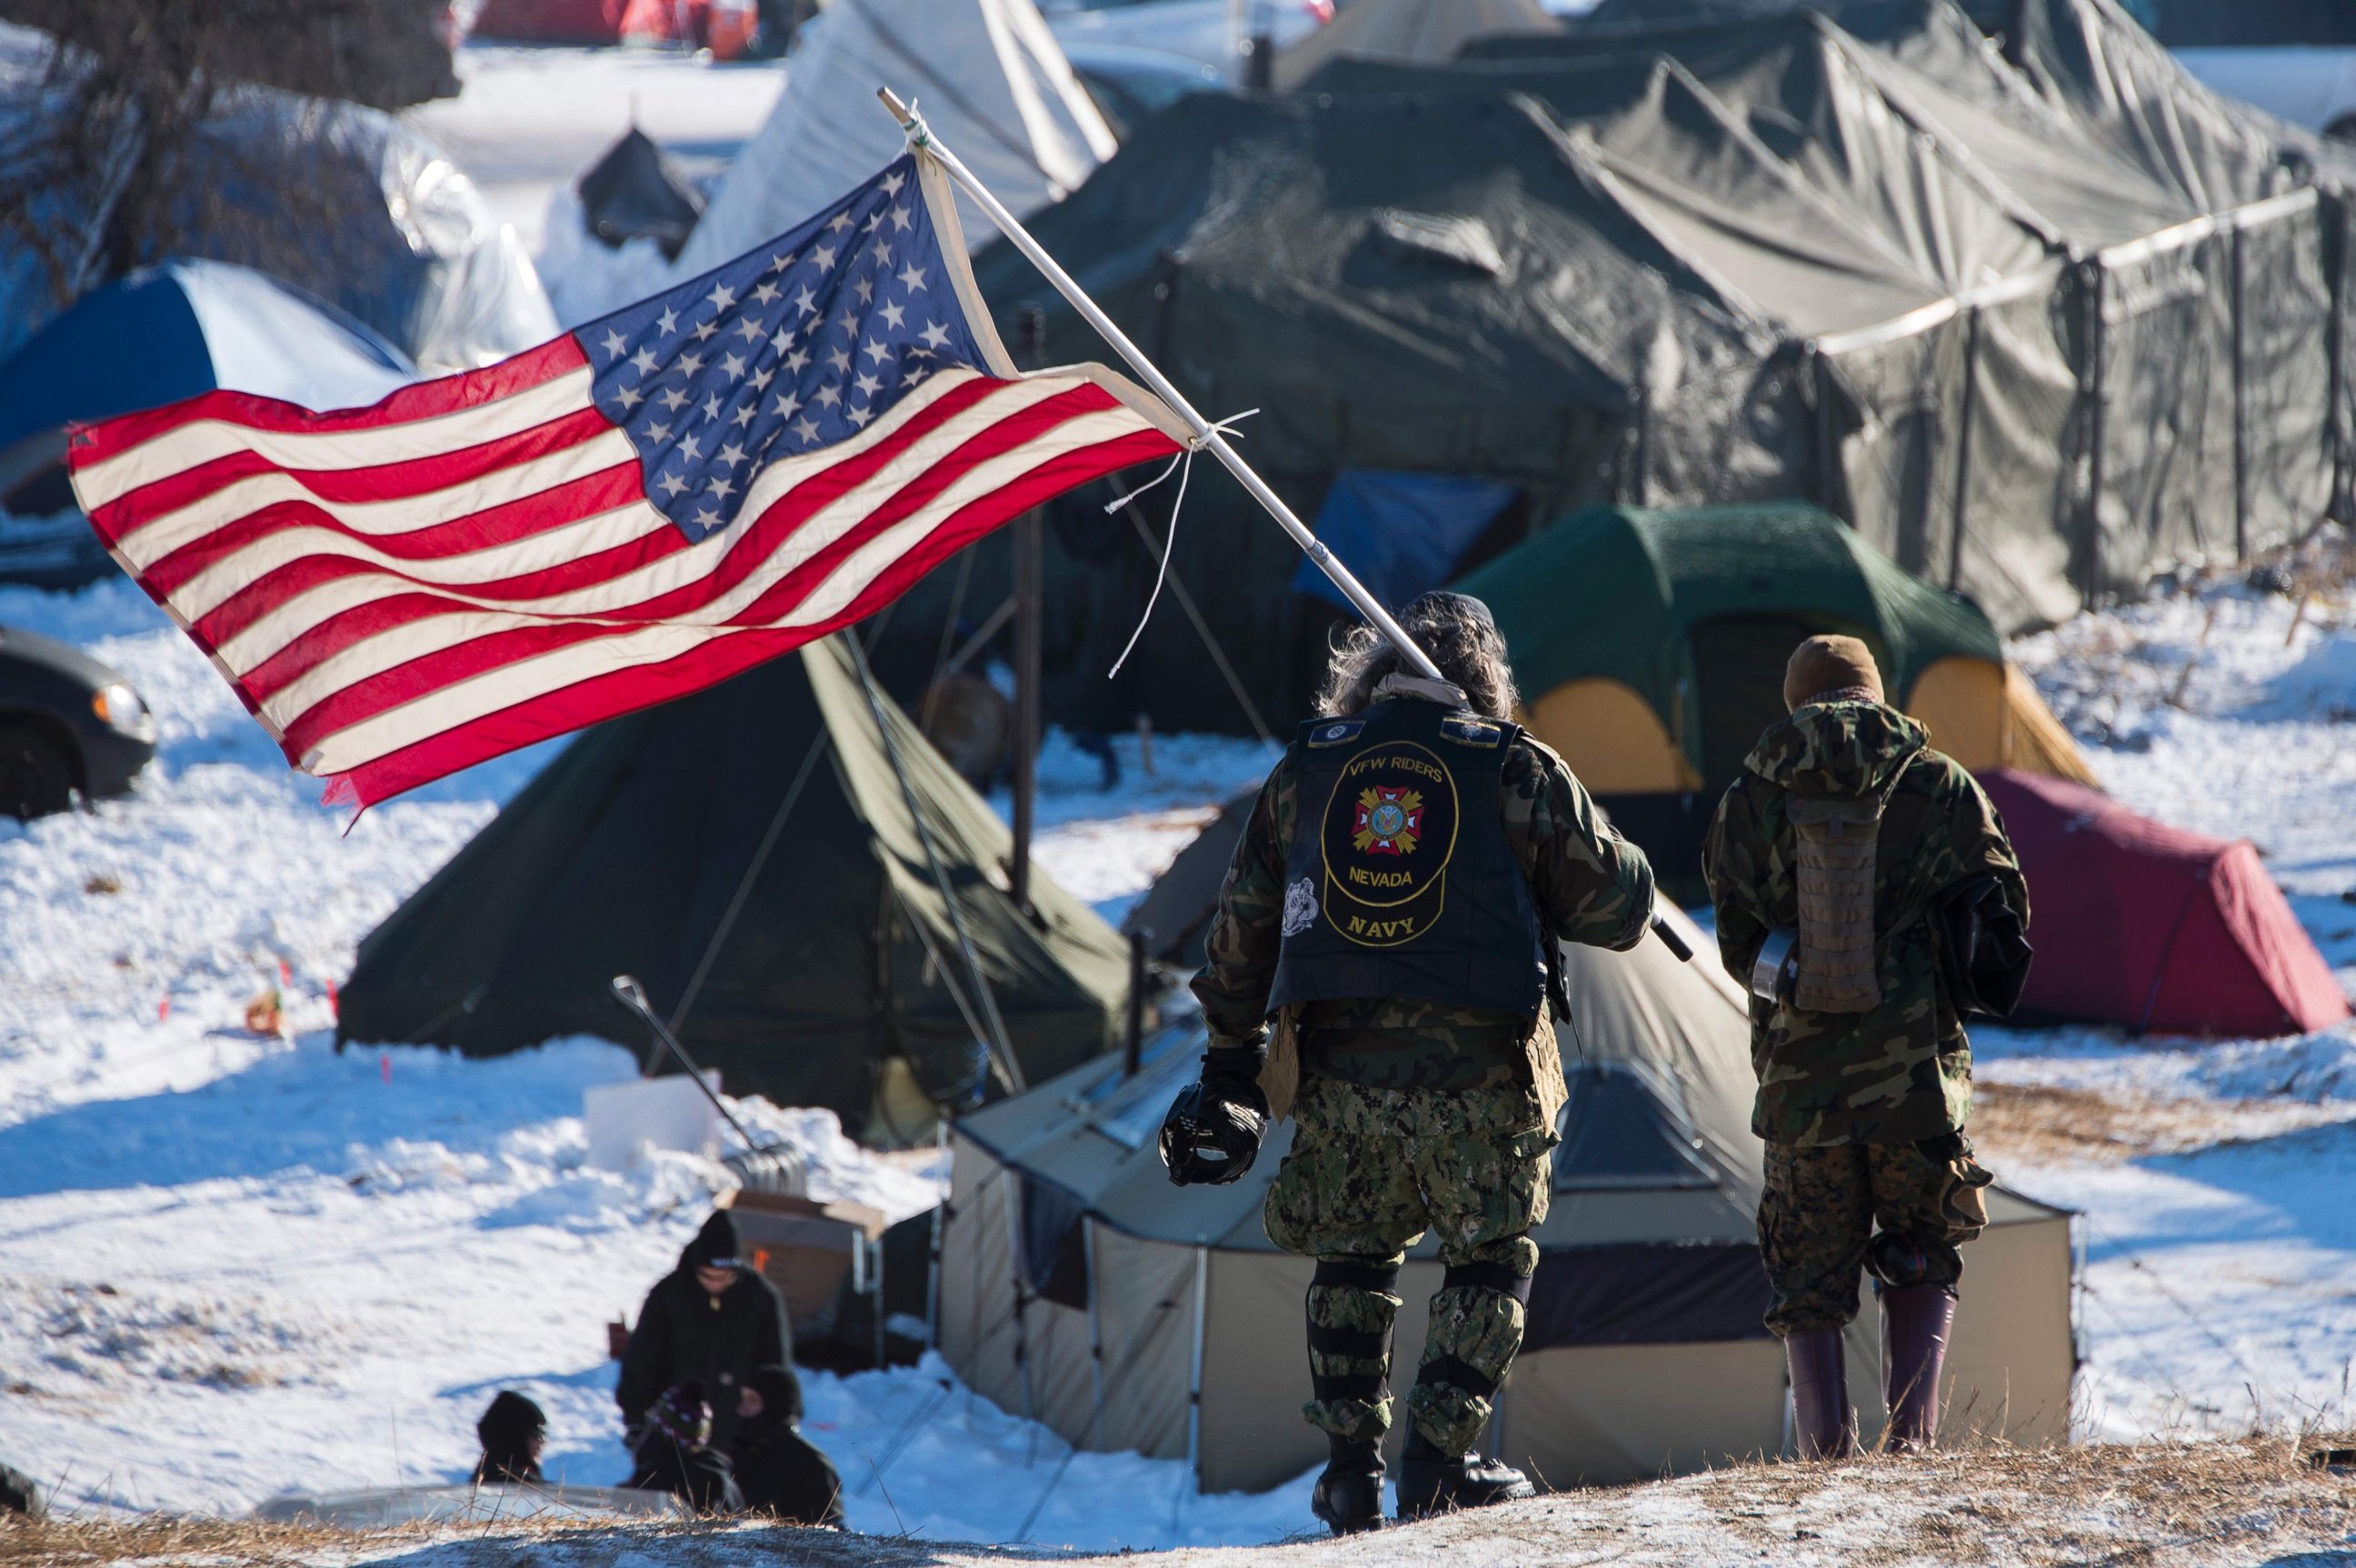 PHOTO: Rob McHaney, a veteran, holds a flag as he leads a group of veteran activists back from a police barricade on a bridge near Oceti Sakowin Camp on the edge of the Standing Rock Sioux Reservation, Dec. 4, 2016 outside Cannon Ball, North Dakota.